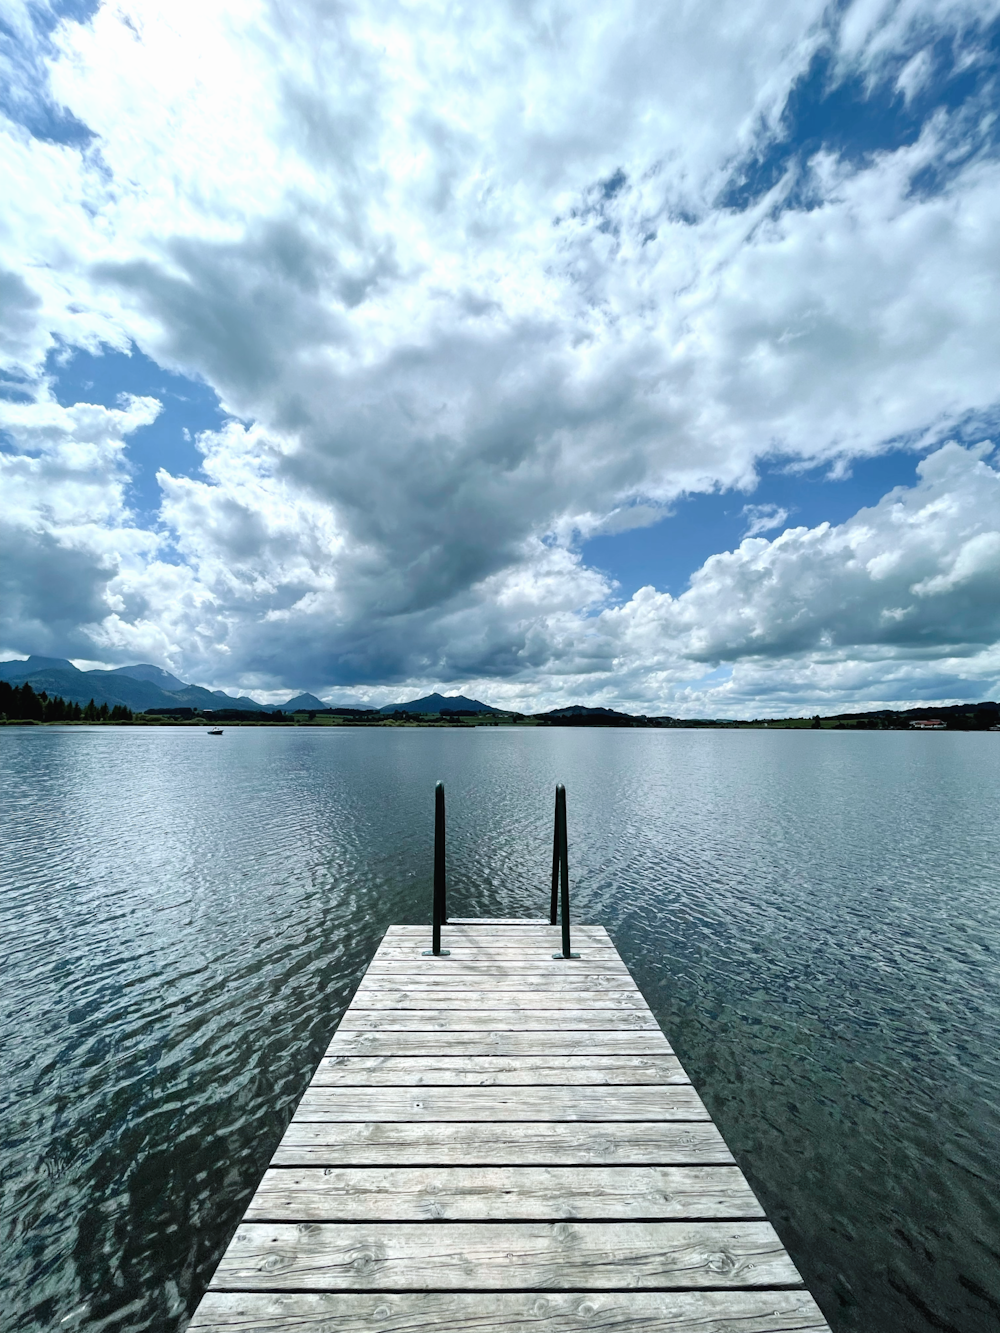 brown wooden dock on body of water under blue and white cloudy sky during daytime